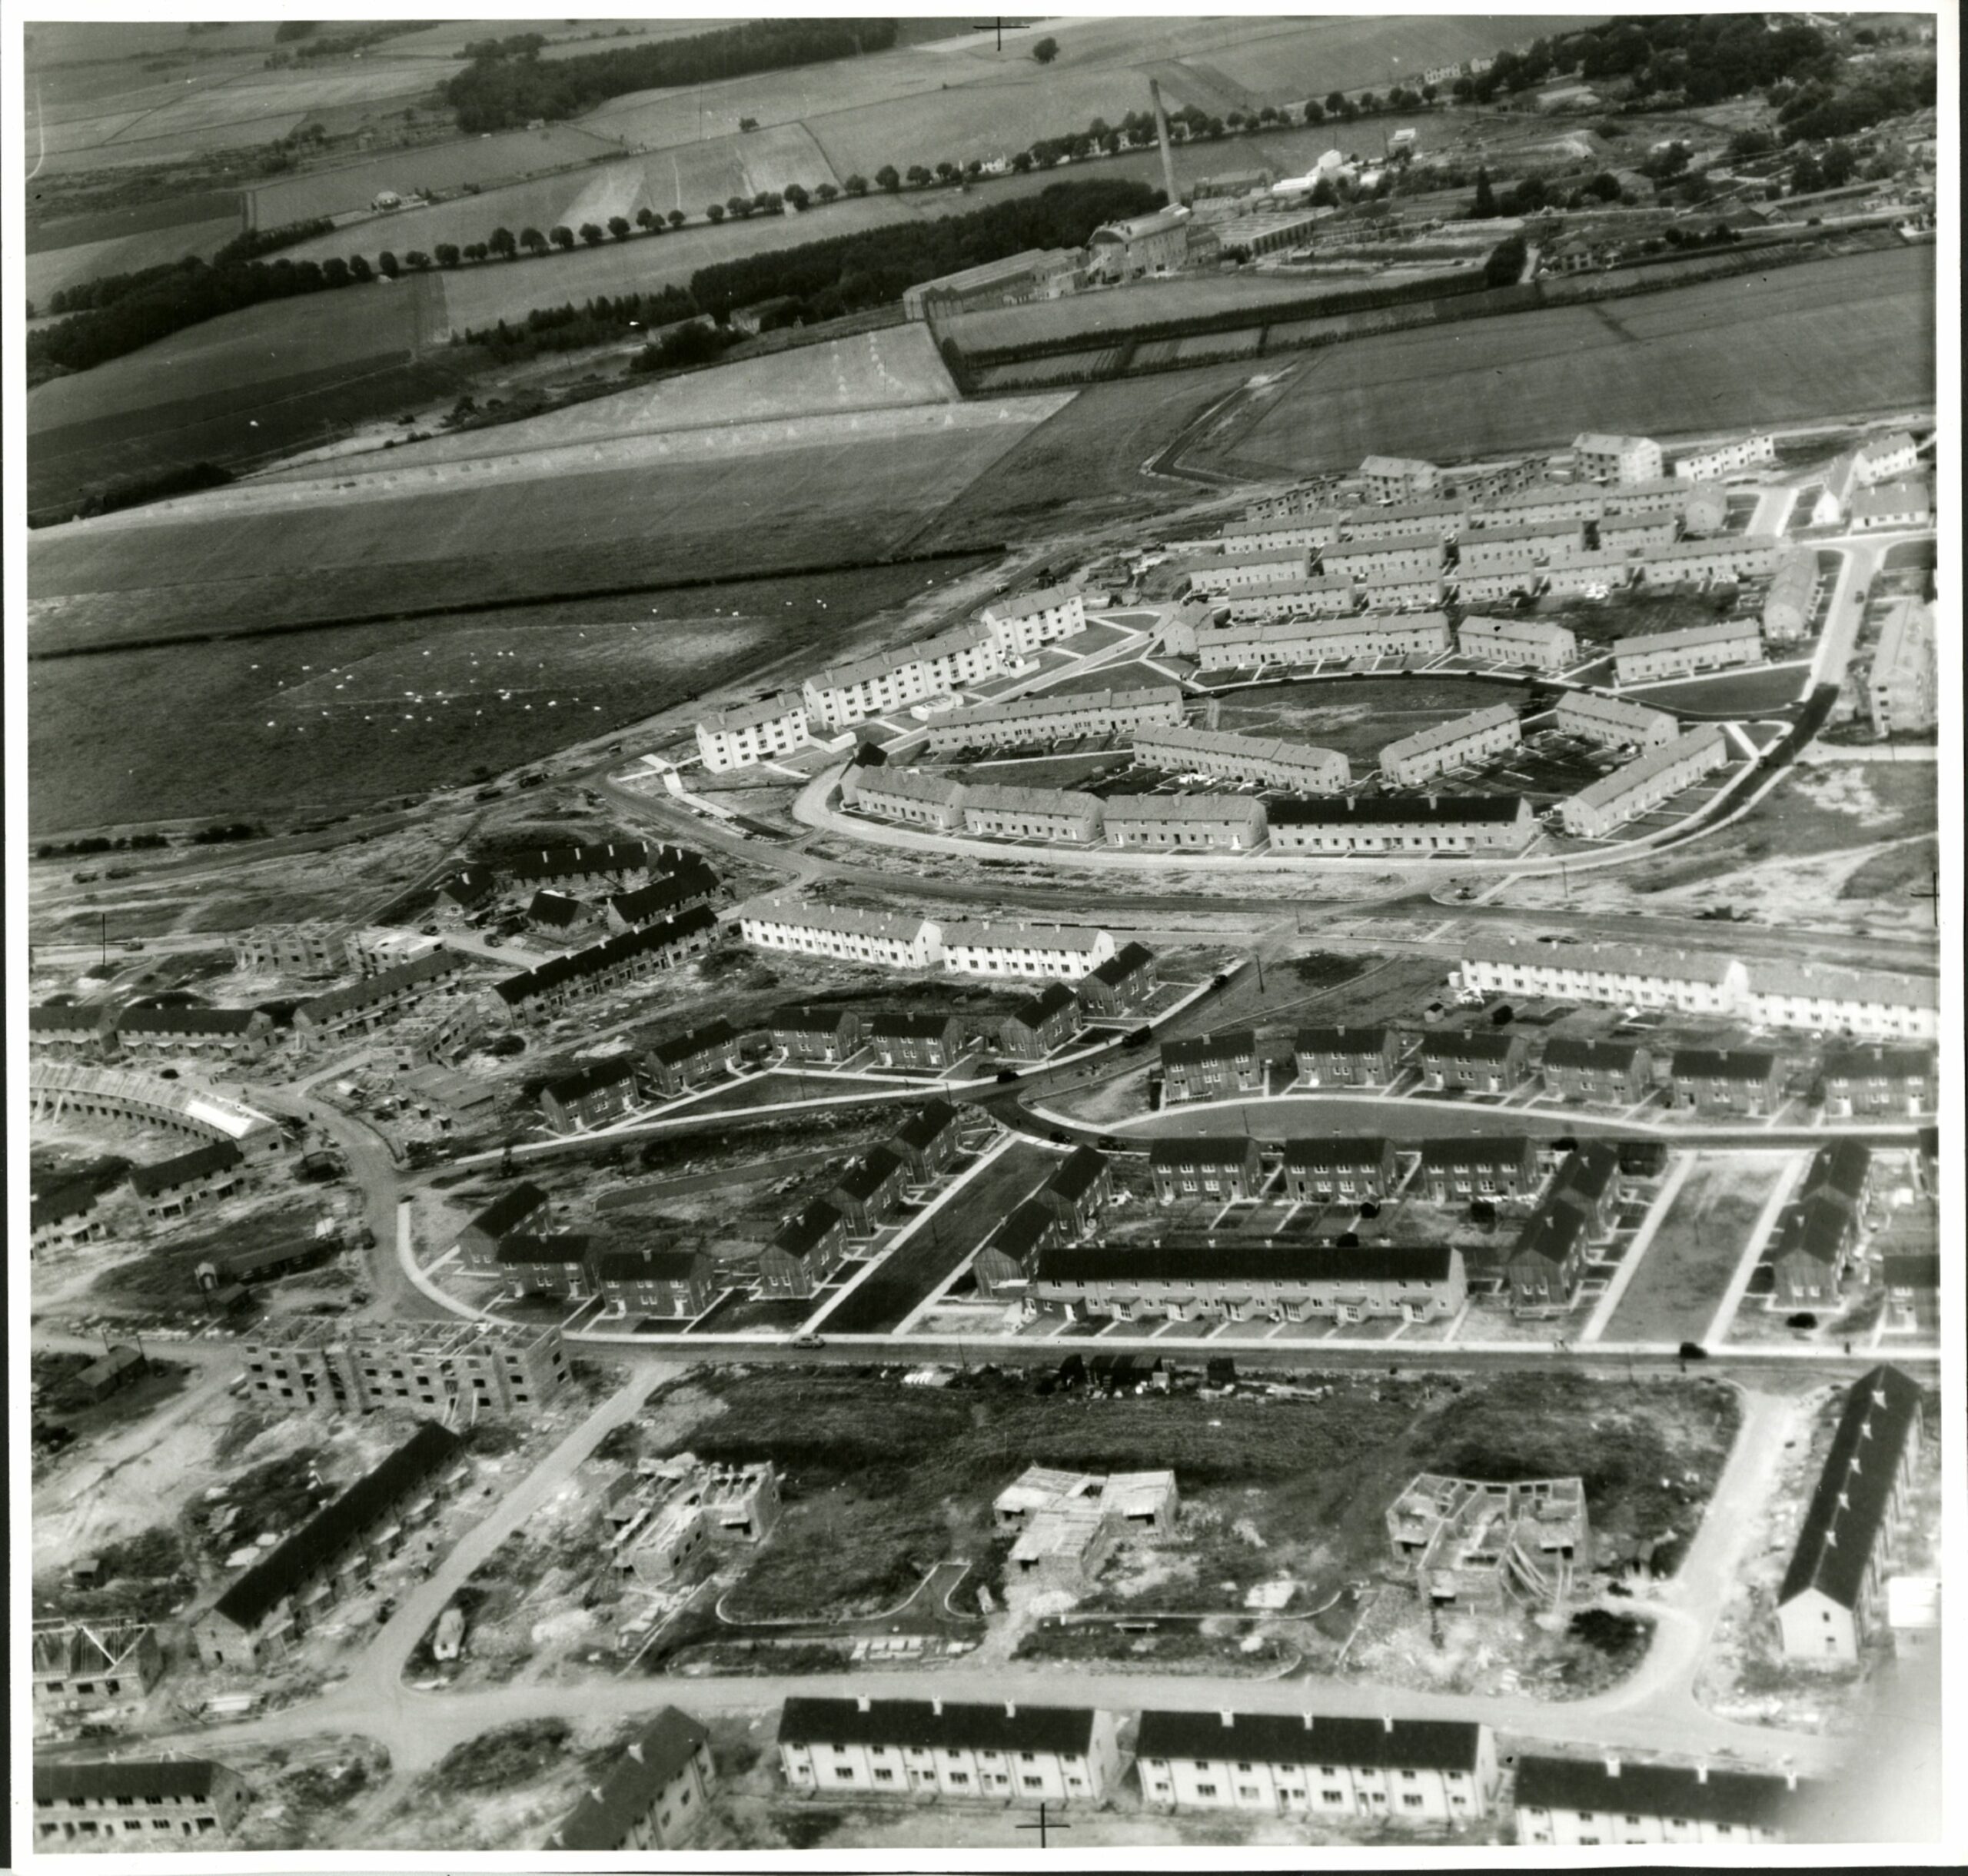 Auchmuty was one of the first boroughs in Glenrothes to be built. This picture is from 1954.